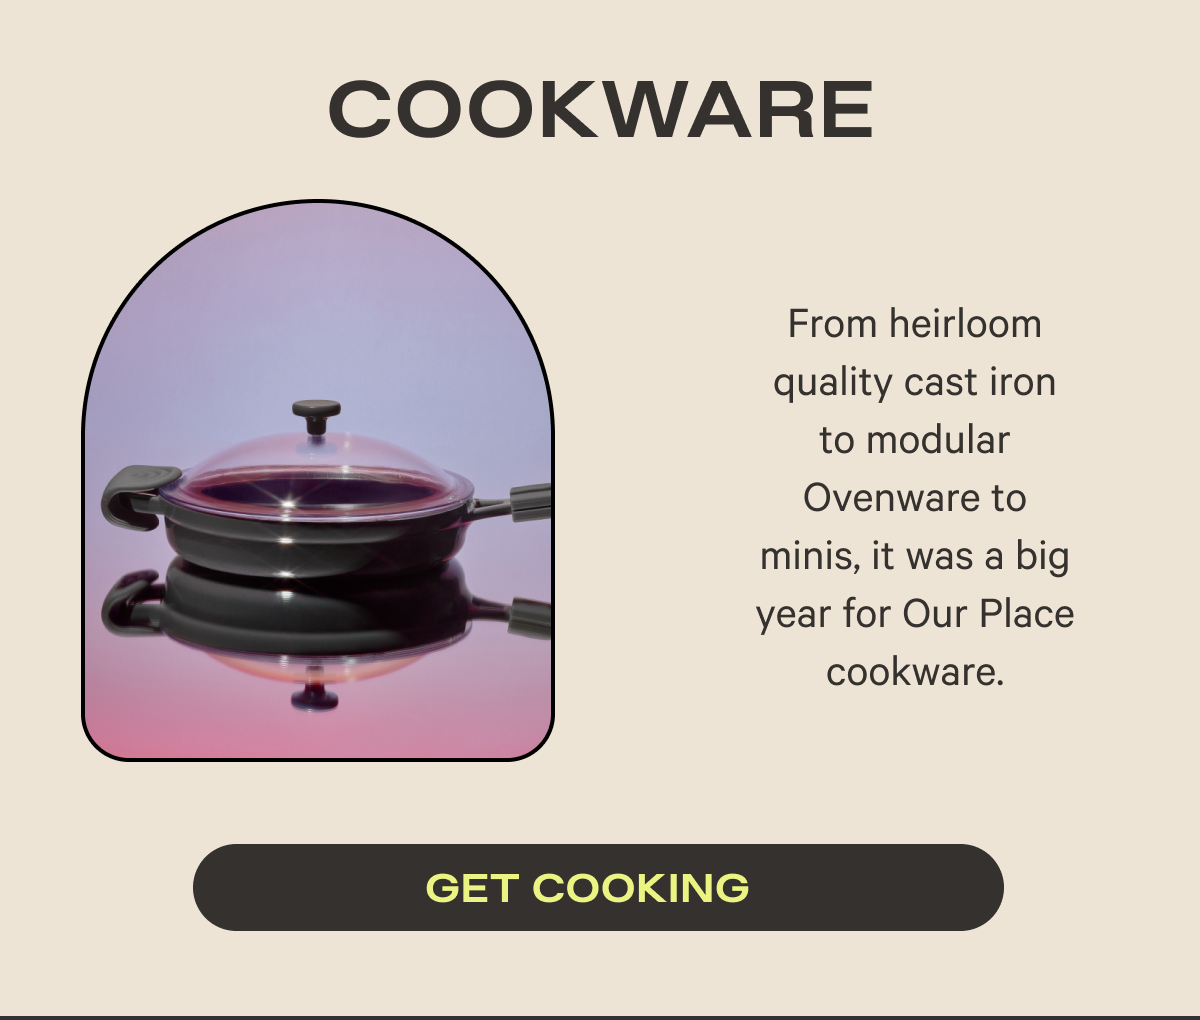 Cookware | From heirloom quality cast iron to modular Ovenware to minis, it was a big year for Our Place cookware.